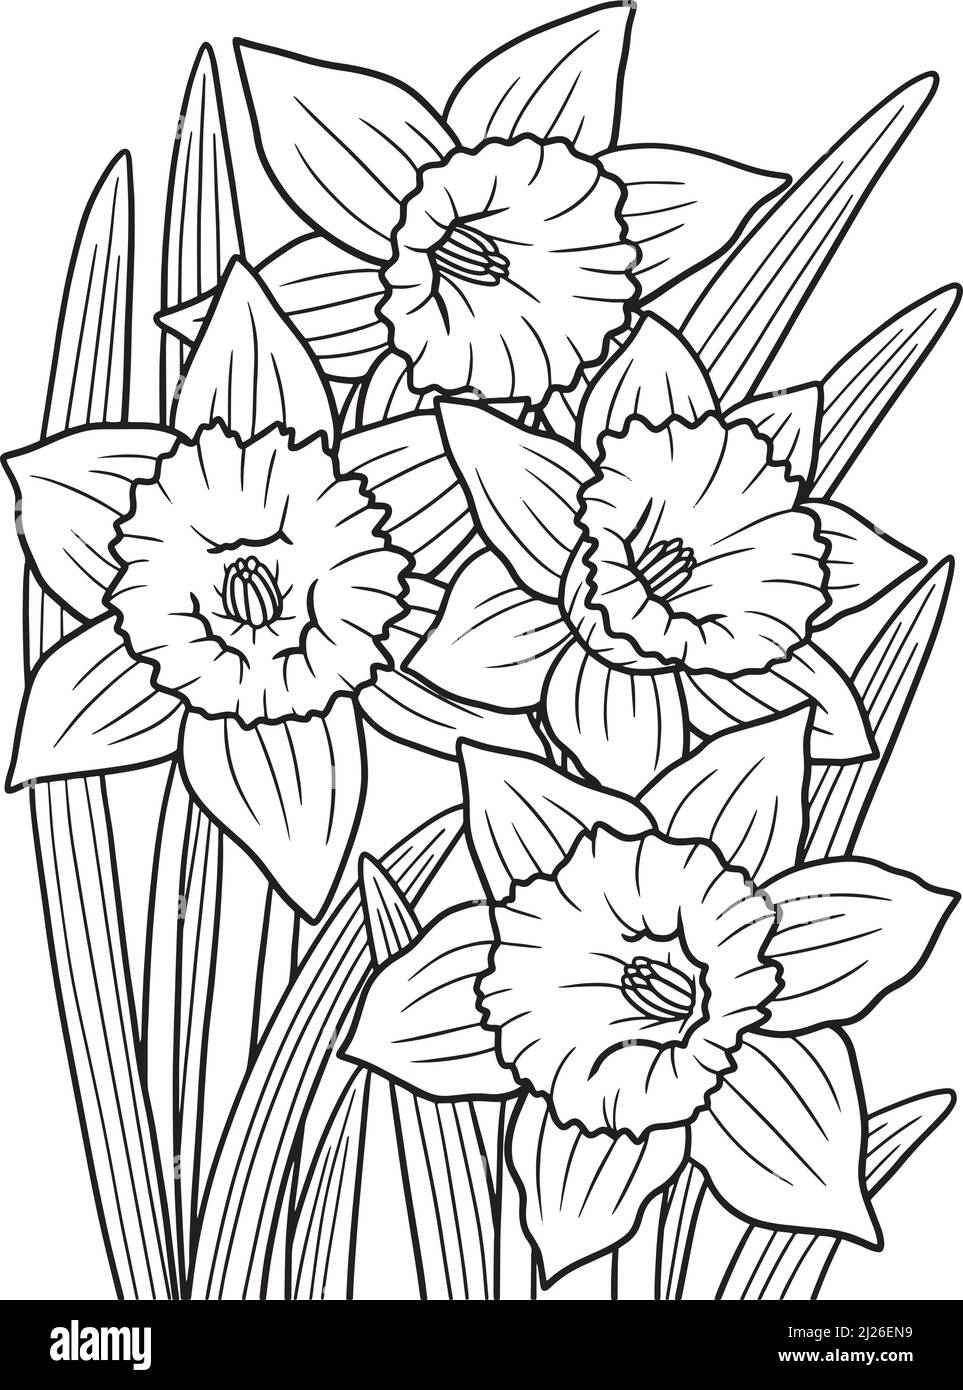 Daffodil Flower Coloring Page for Adults Stock Vector Image & Art ...